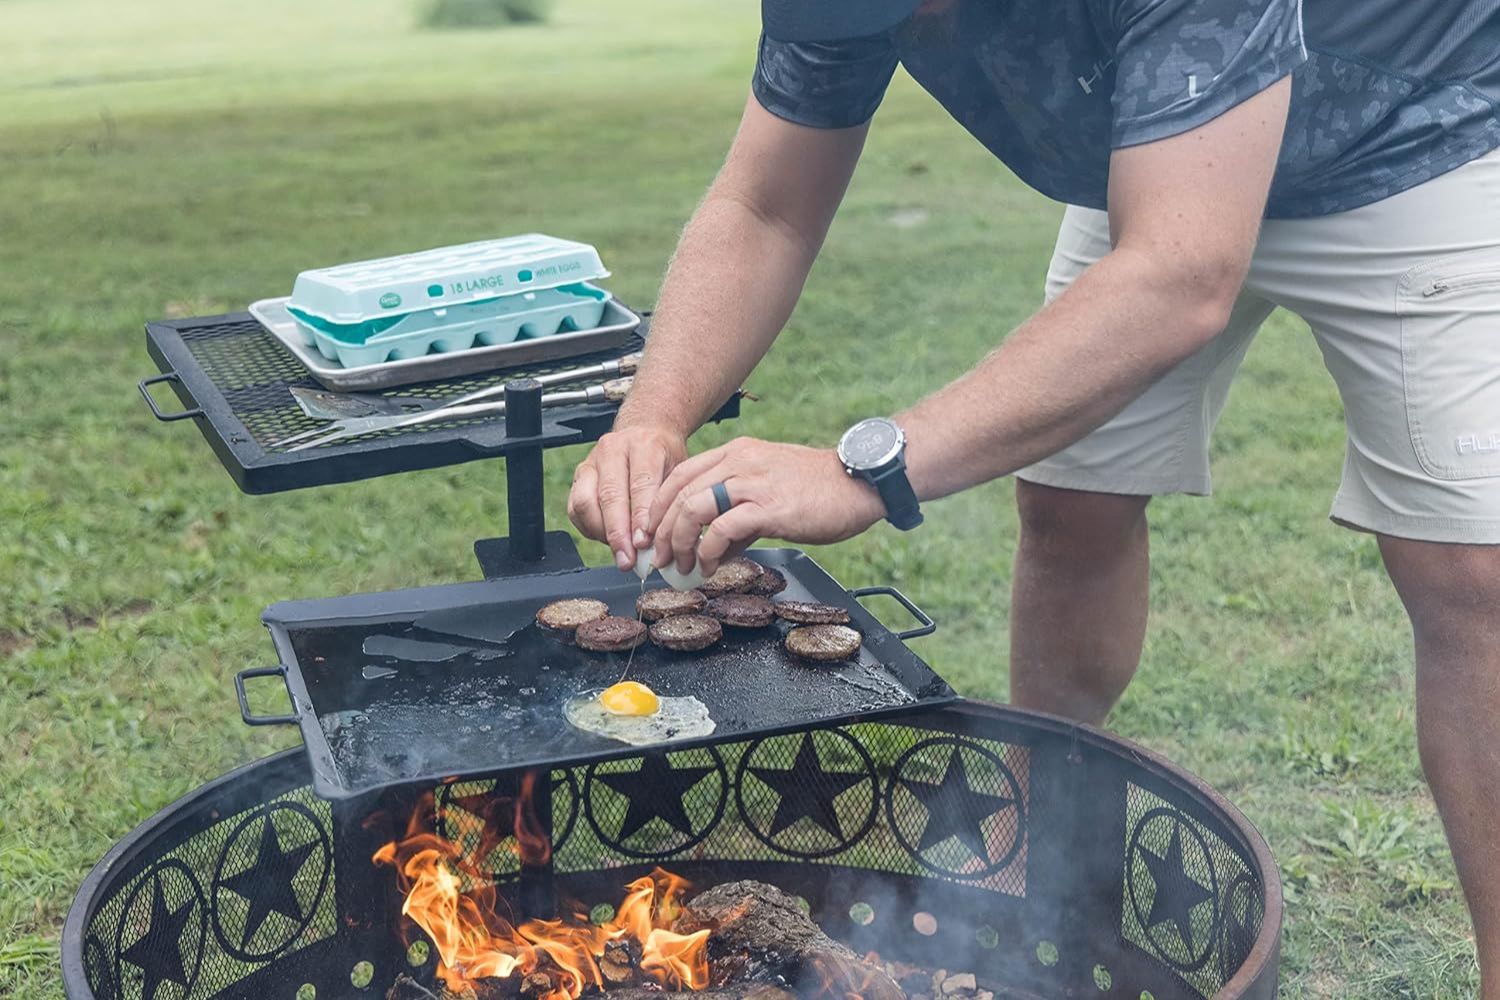 A person using the CanCooker GameMaker Gravity Grill Combo over a fire pit to cook eggs and sausage.